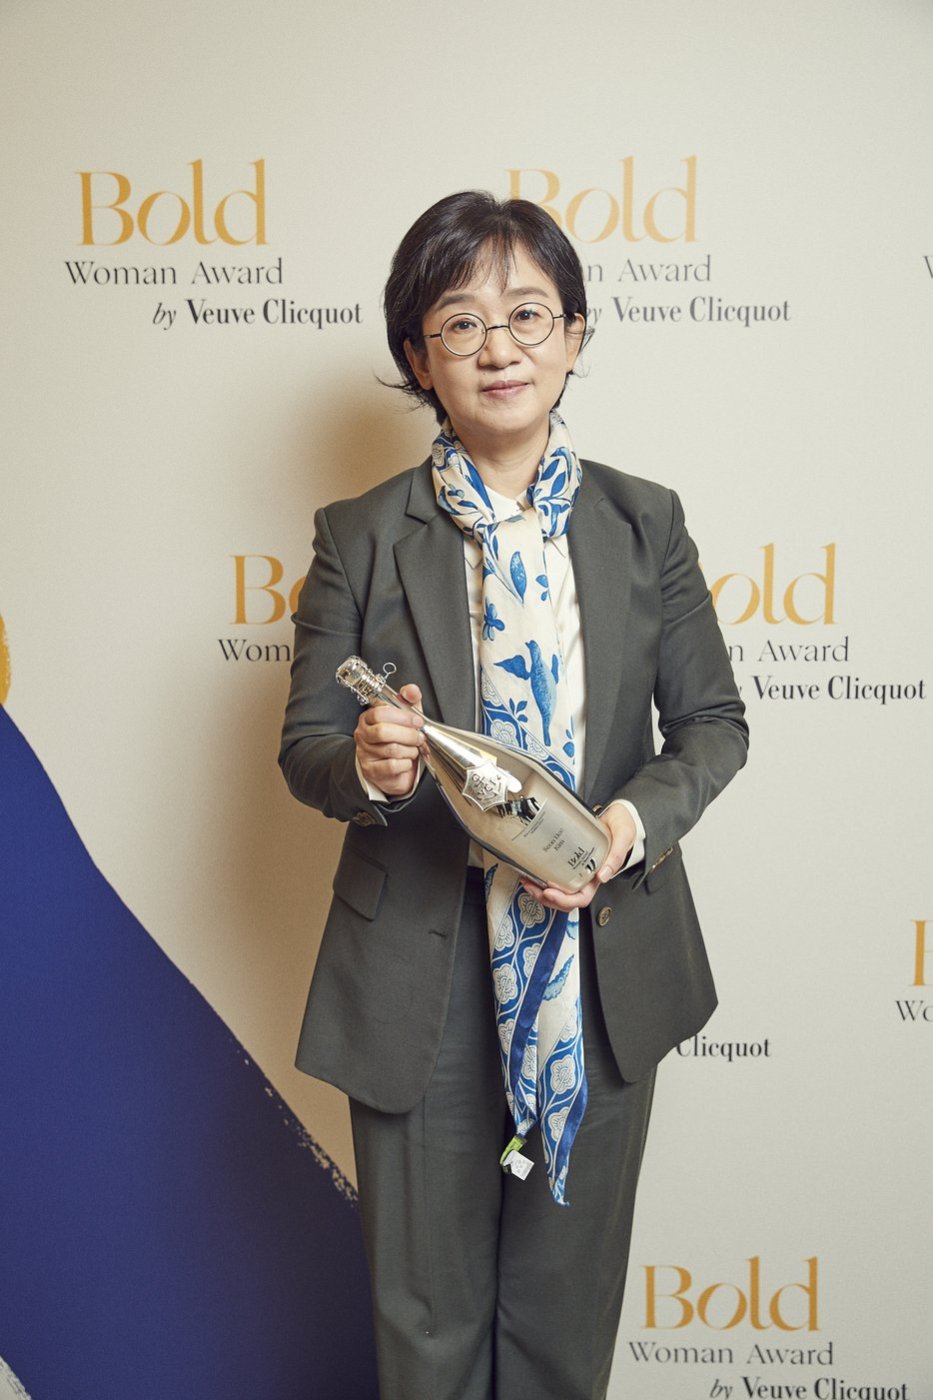 BOLD WOMAN AWARD BY VEUVE CLICQUOT